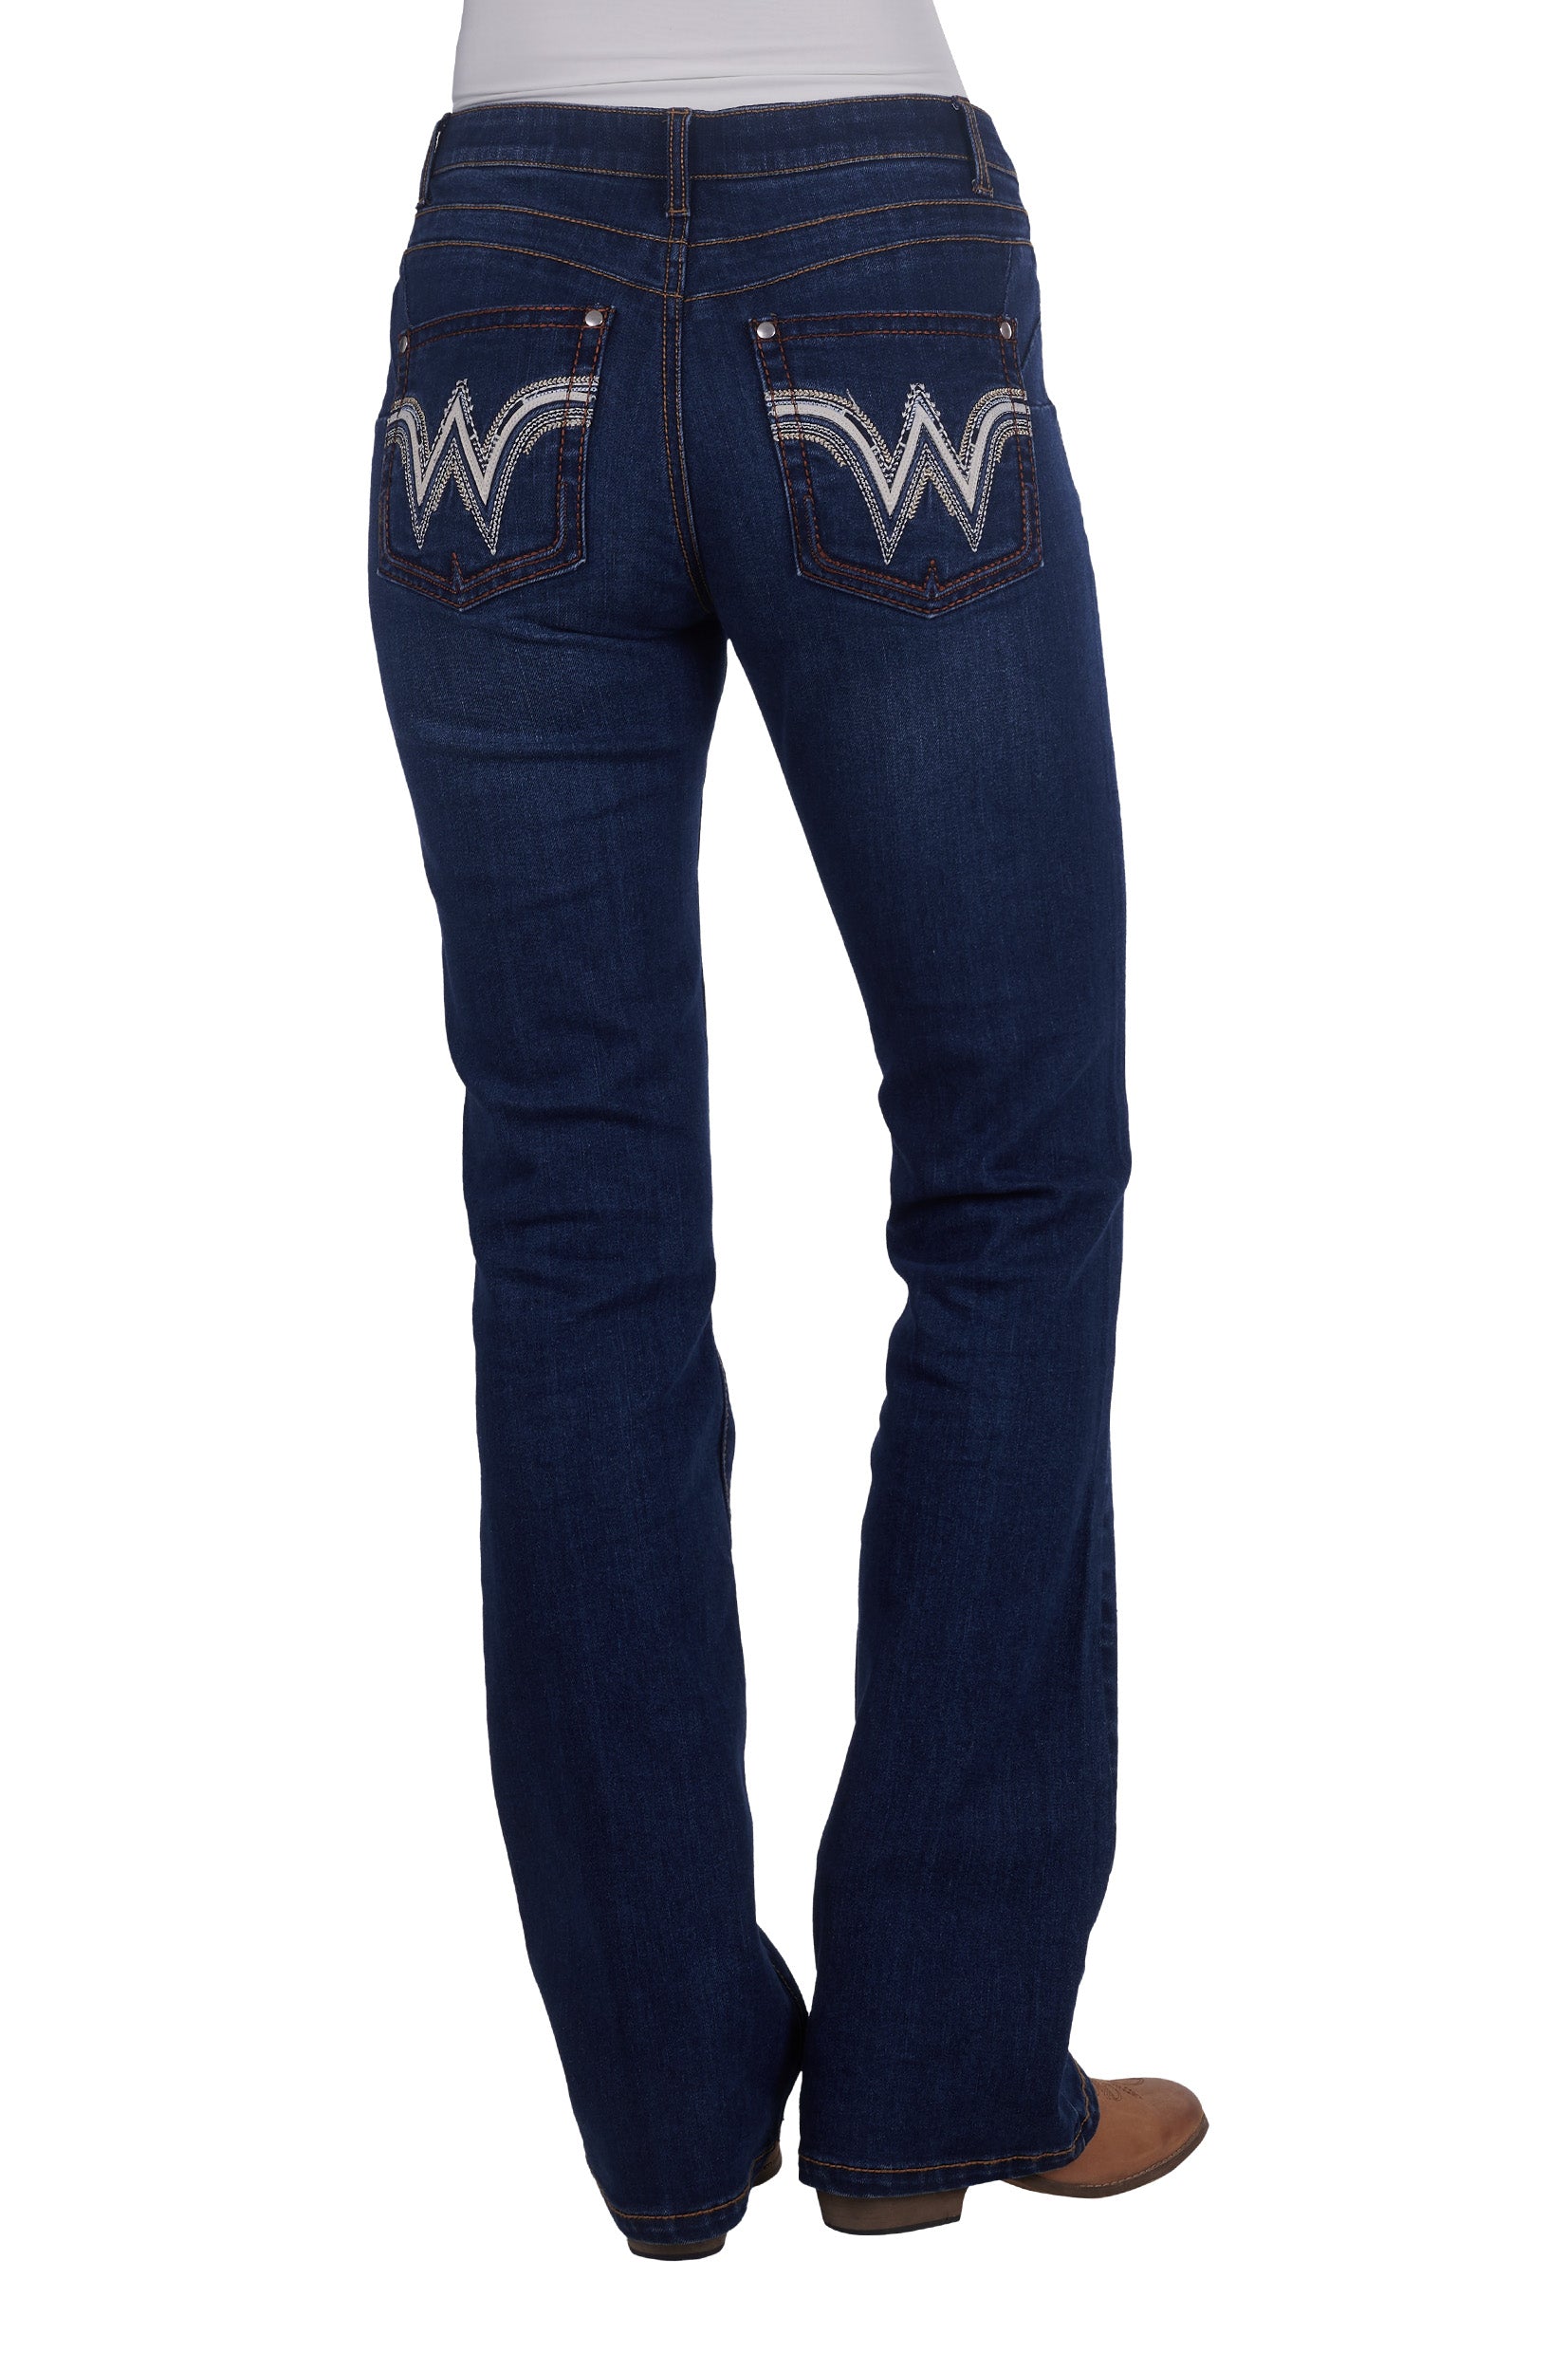 Wrangler Wmns Tilly Jean Q Baby Booty Up